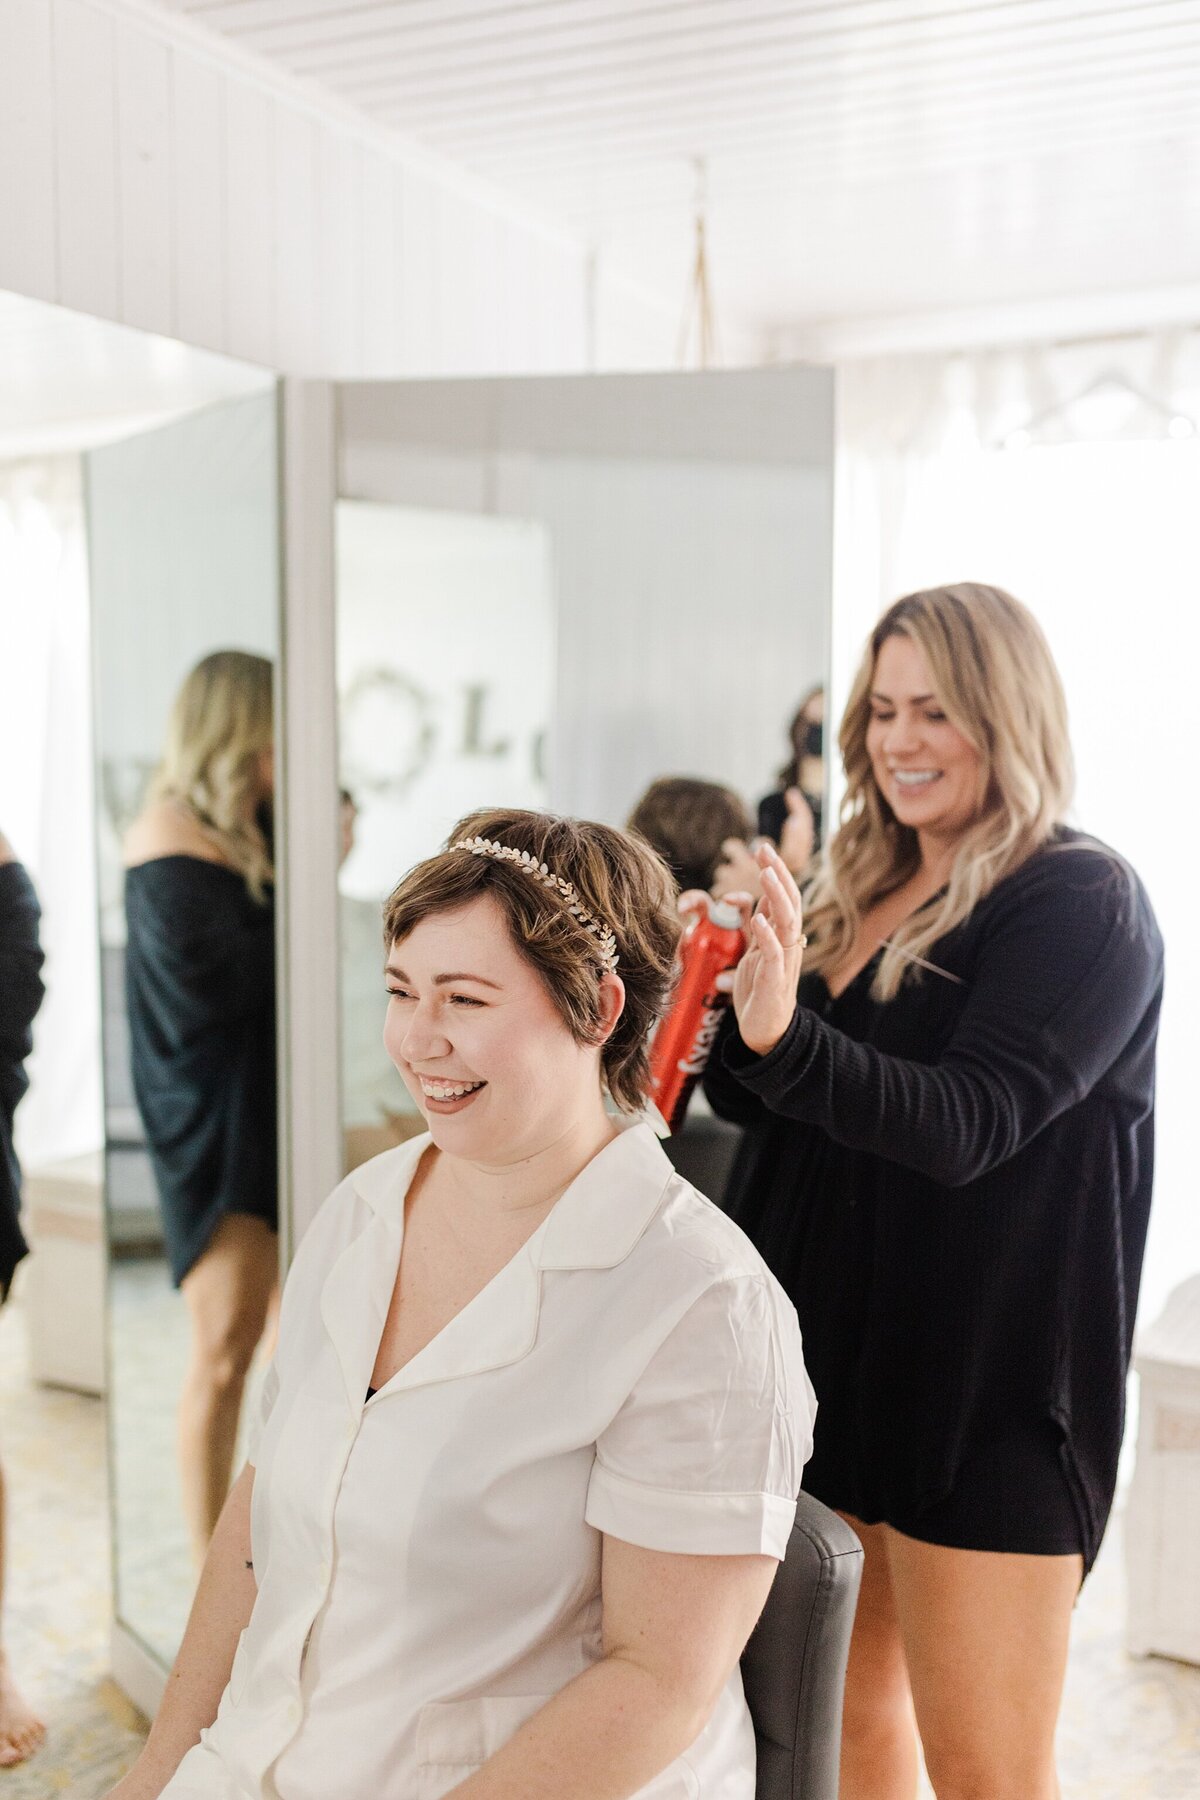 A candid shot of a bride getting her hair done before her wedding ceremony in Dallas, Texas. The bride is wearing a white shirt and a floral headband while her stylist stands behind her wearing all black.